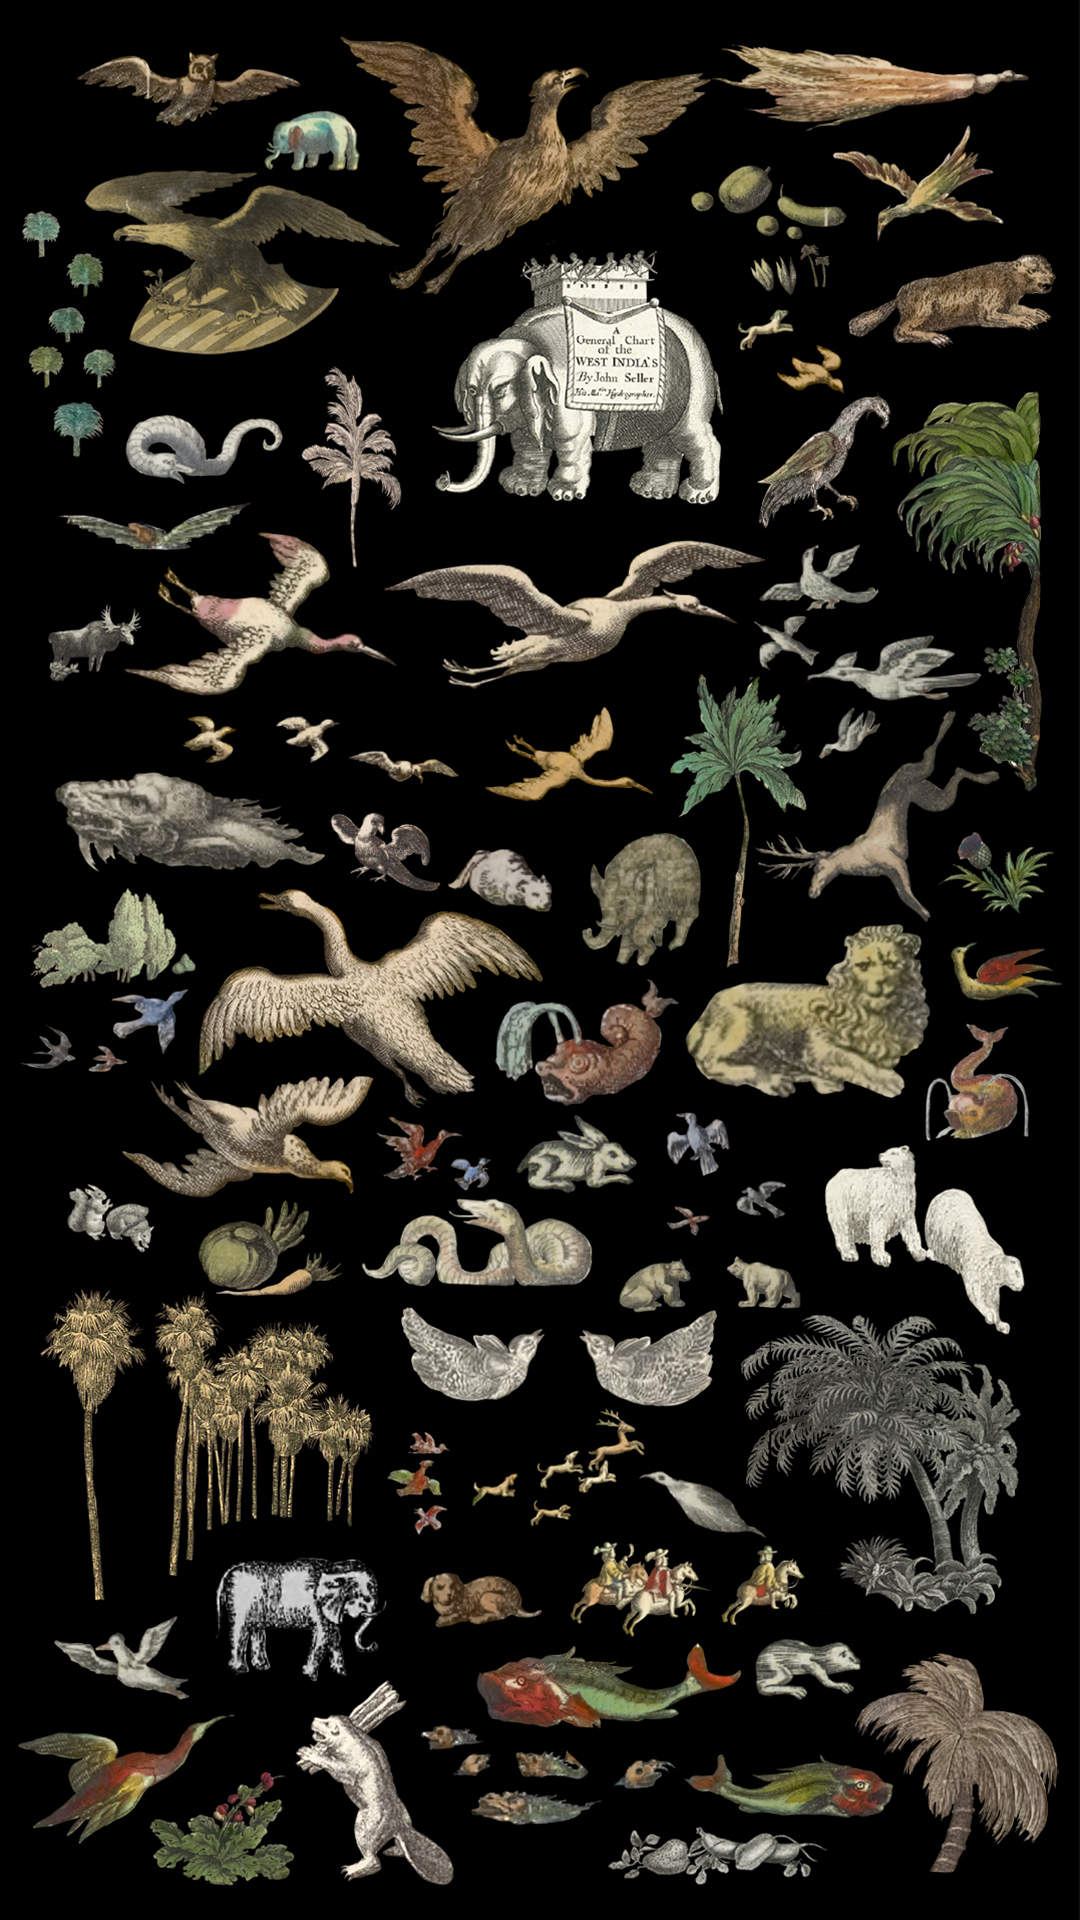 A collage of cutouts against a black backdrop, showing tropical plants alongside birds, fish, and other animals, some of which are depicted inaccurately or appear based on fantasy